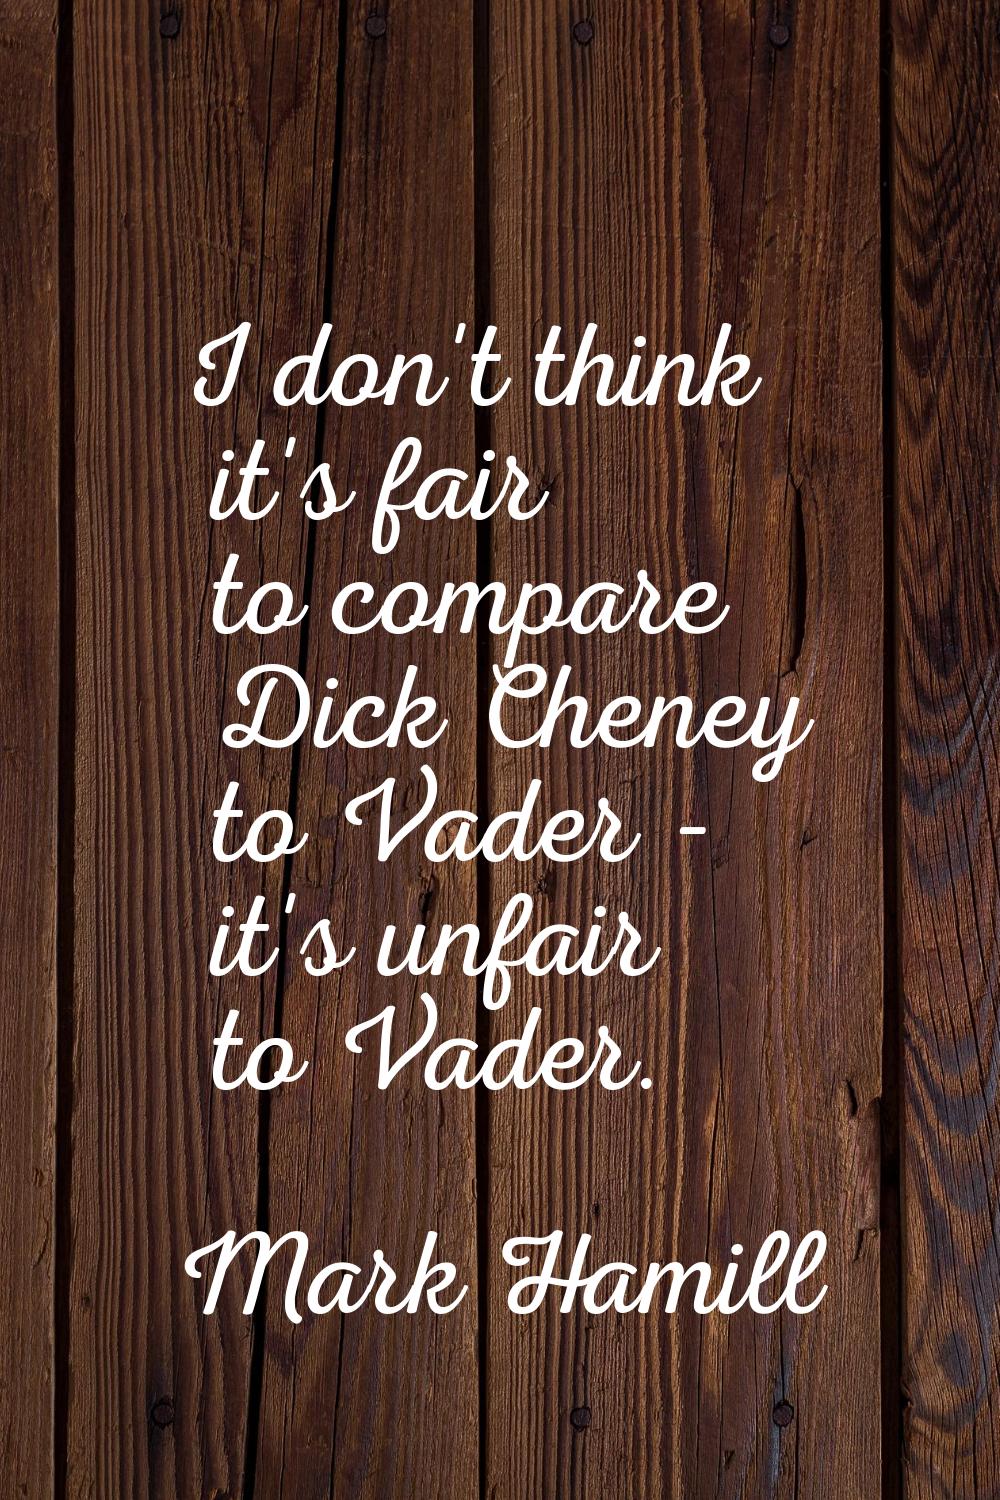 I don't think it's fair to compare Dick Cheney to Vader - it's unfair to Vader.